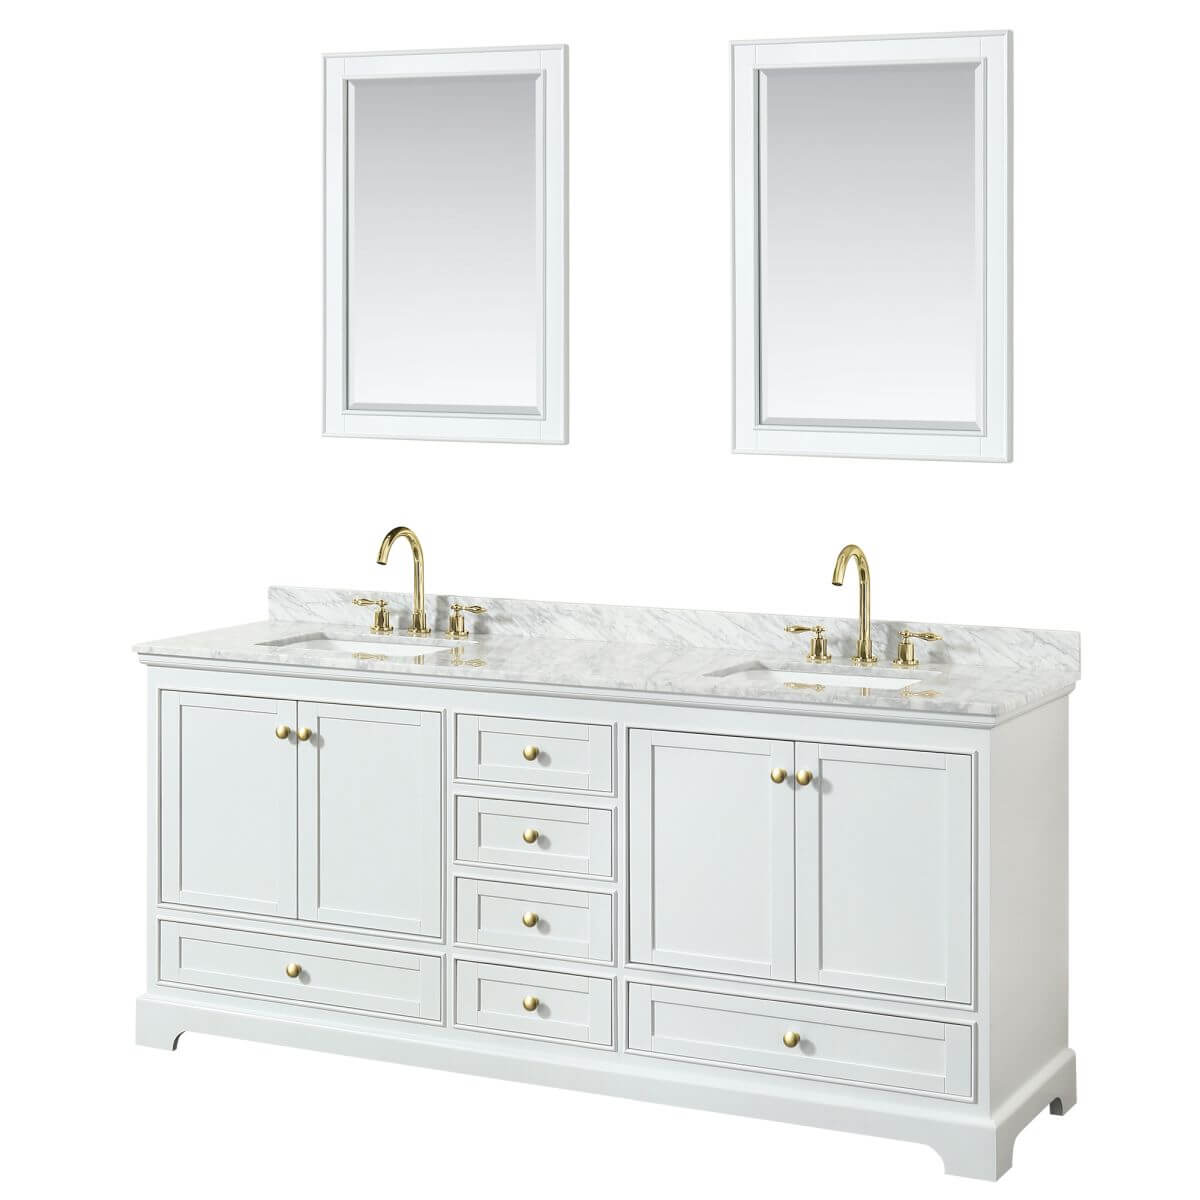 Wyndham Collection Deborah 80 inch Double Bathroom Vanity in White with White Carrara Marble Countertop, Undermount Square Sinks, Brushed Gold Trim and 24 inch Mirrors - WCS202080DWGCMUNSM24